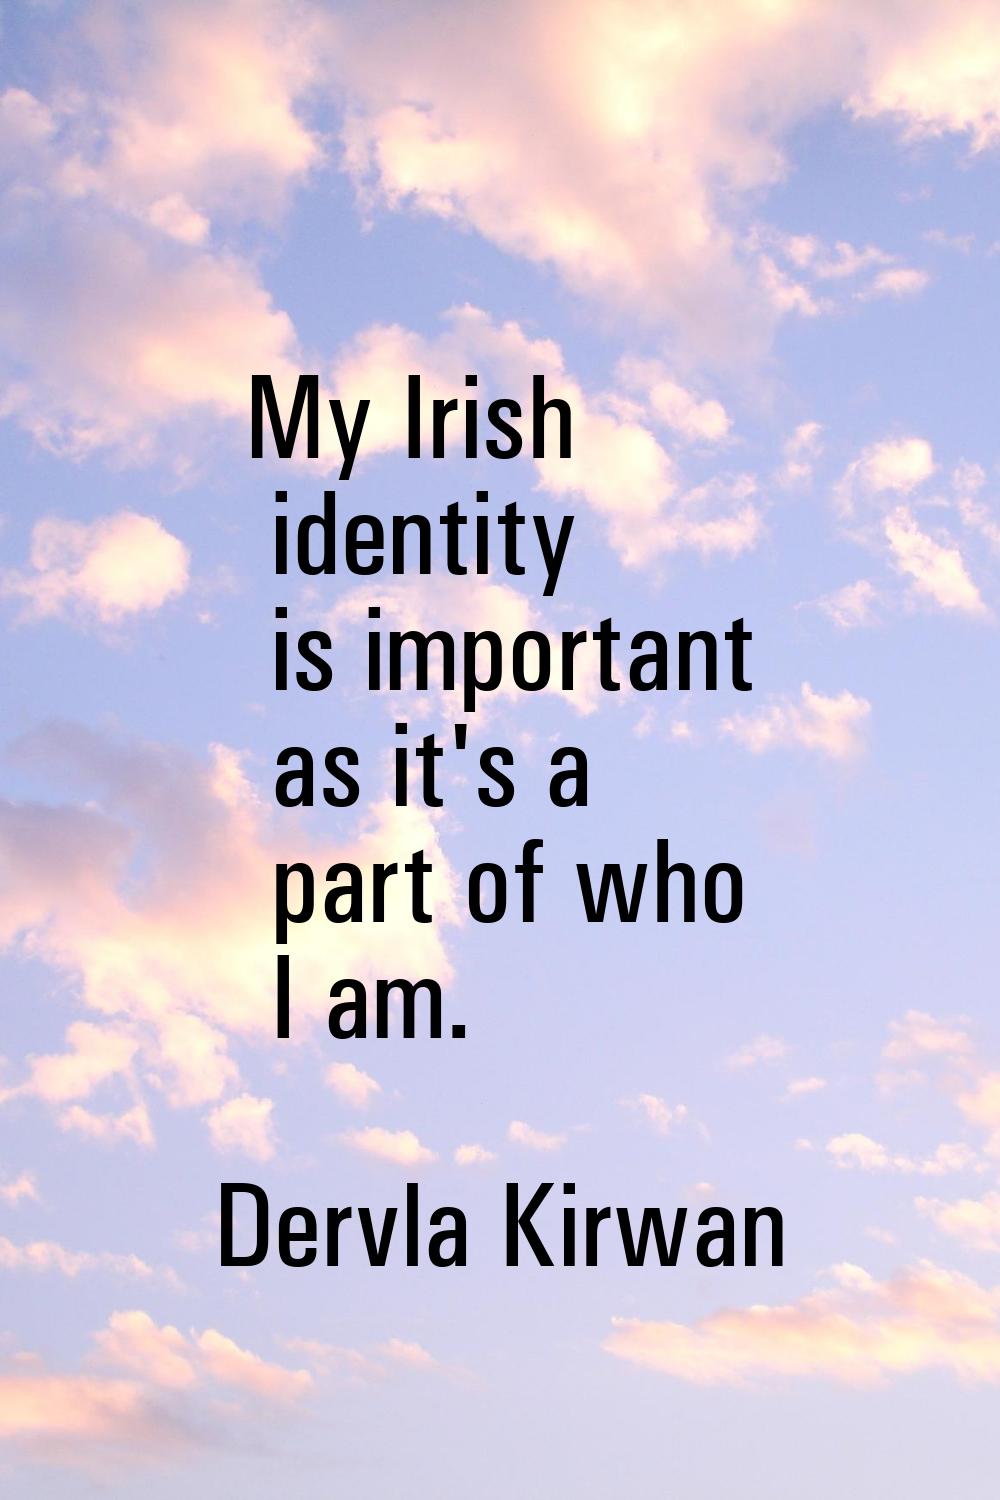 My Irish identity is important as it's a part of who I am.